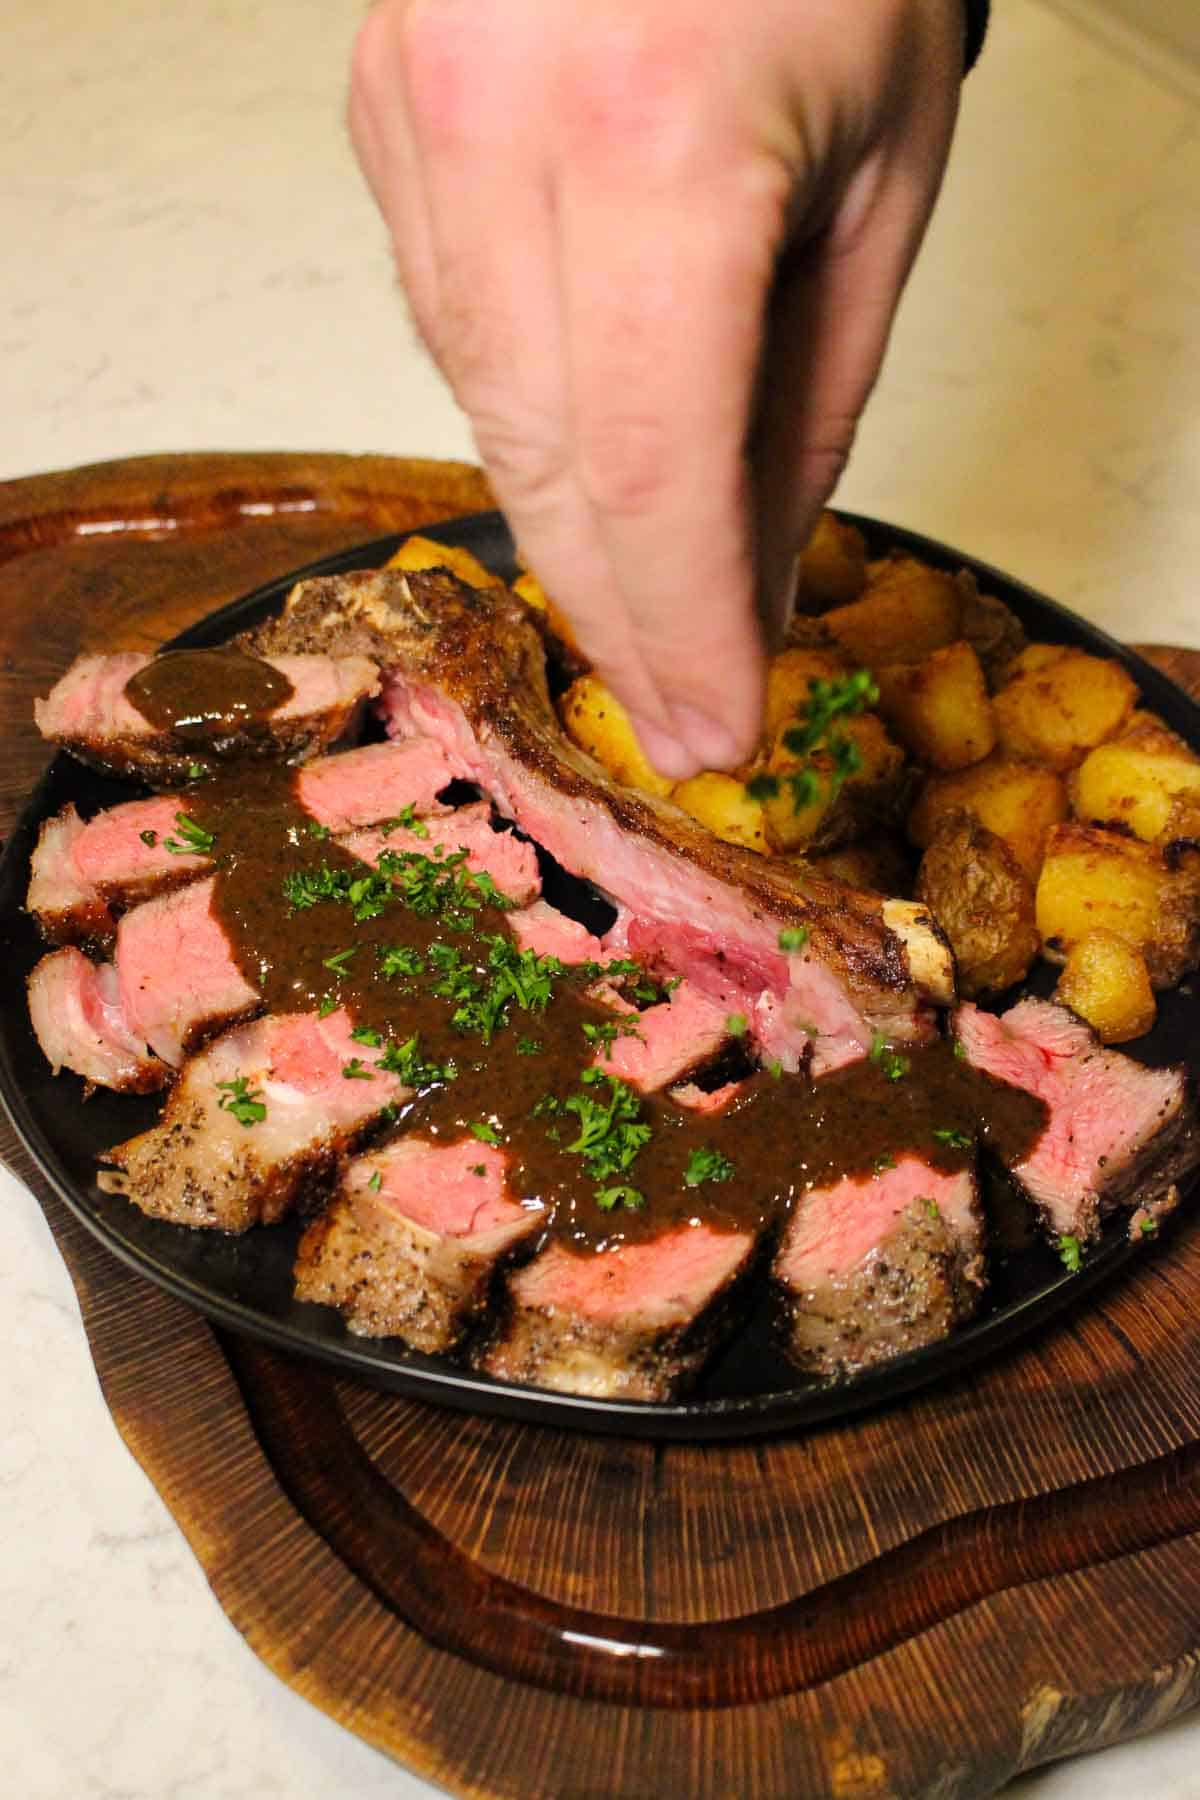 Garnishing the Pan Seared Steaks with Crispy Potatoes before serving.